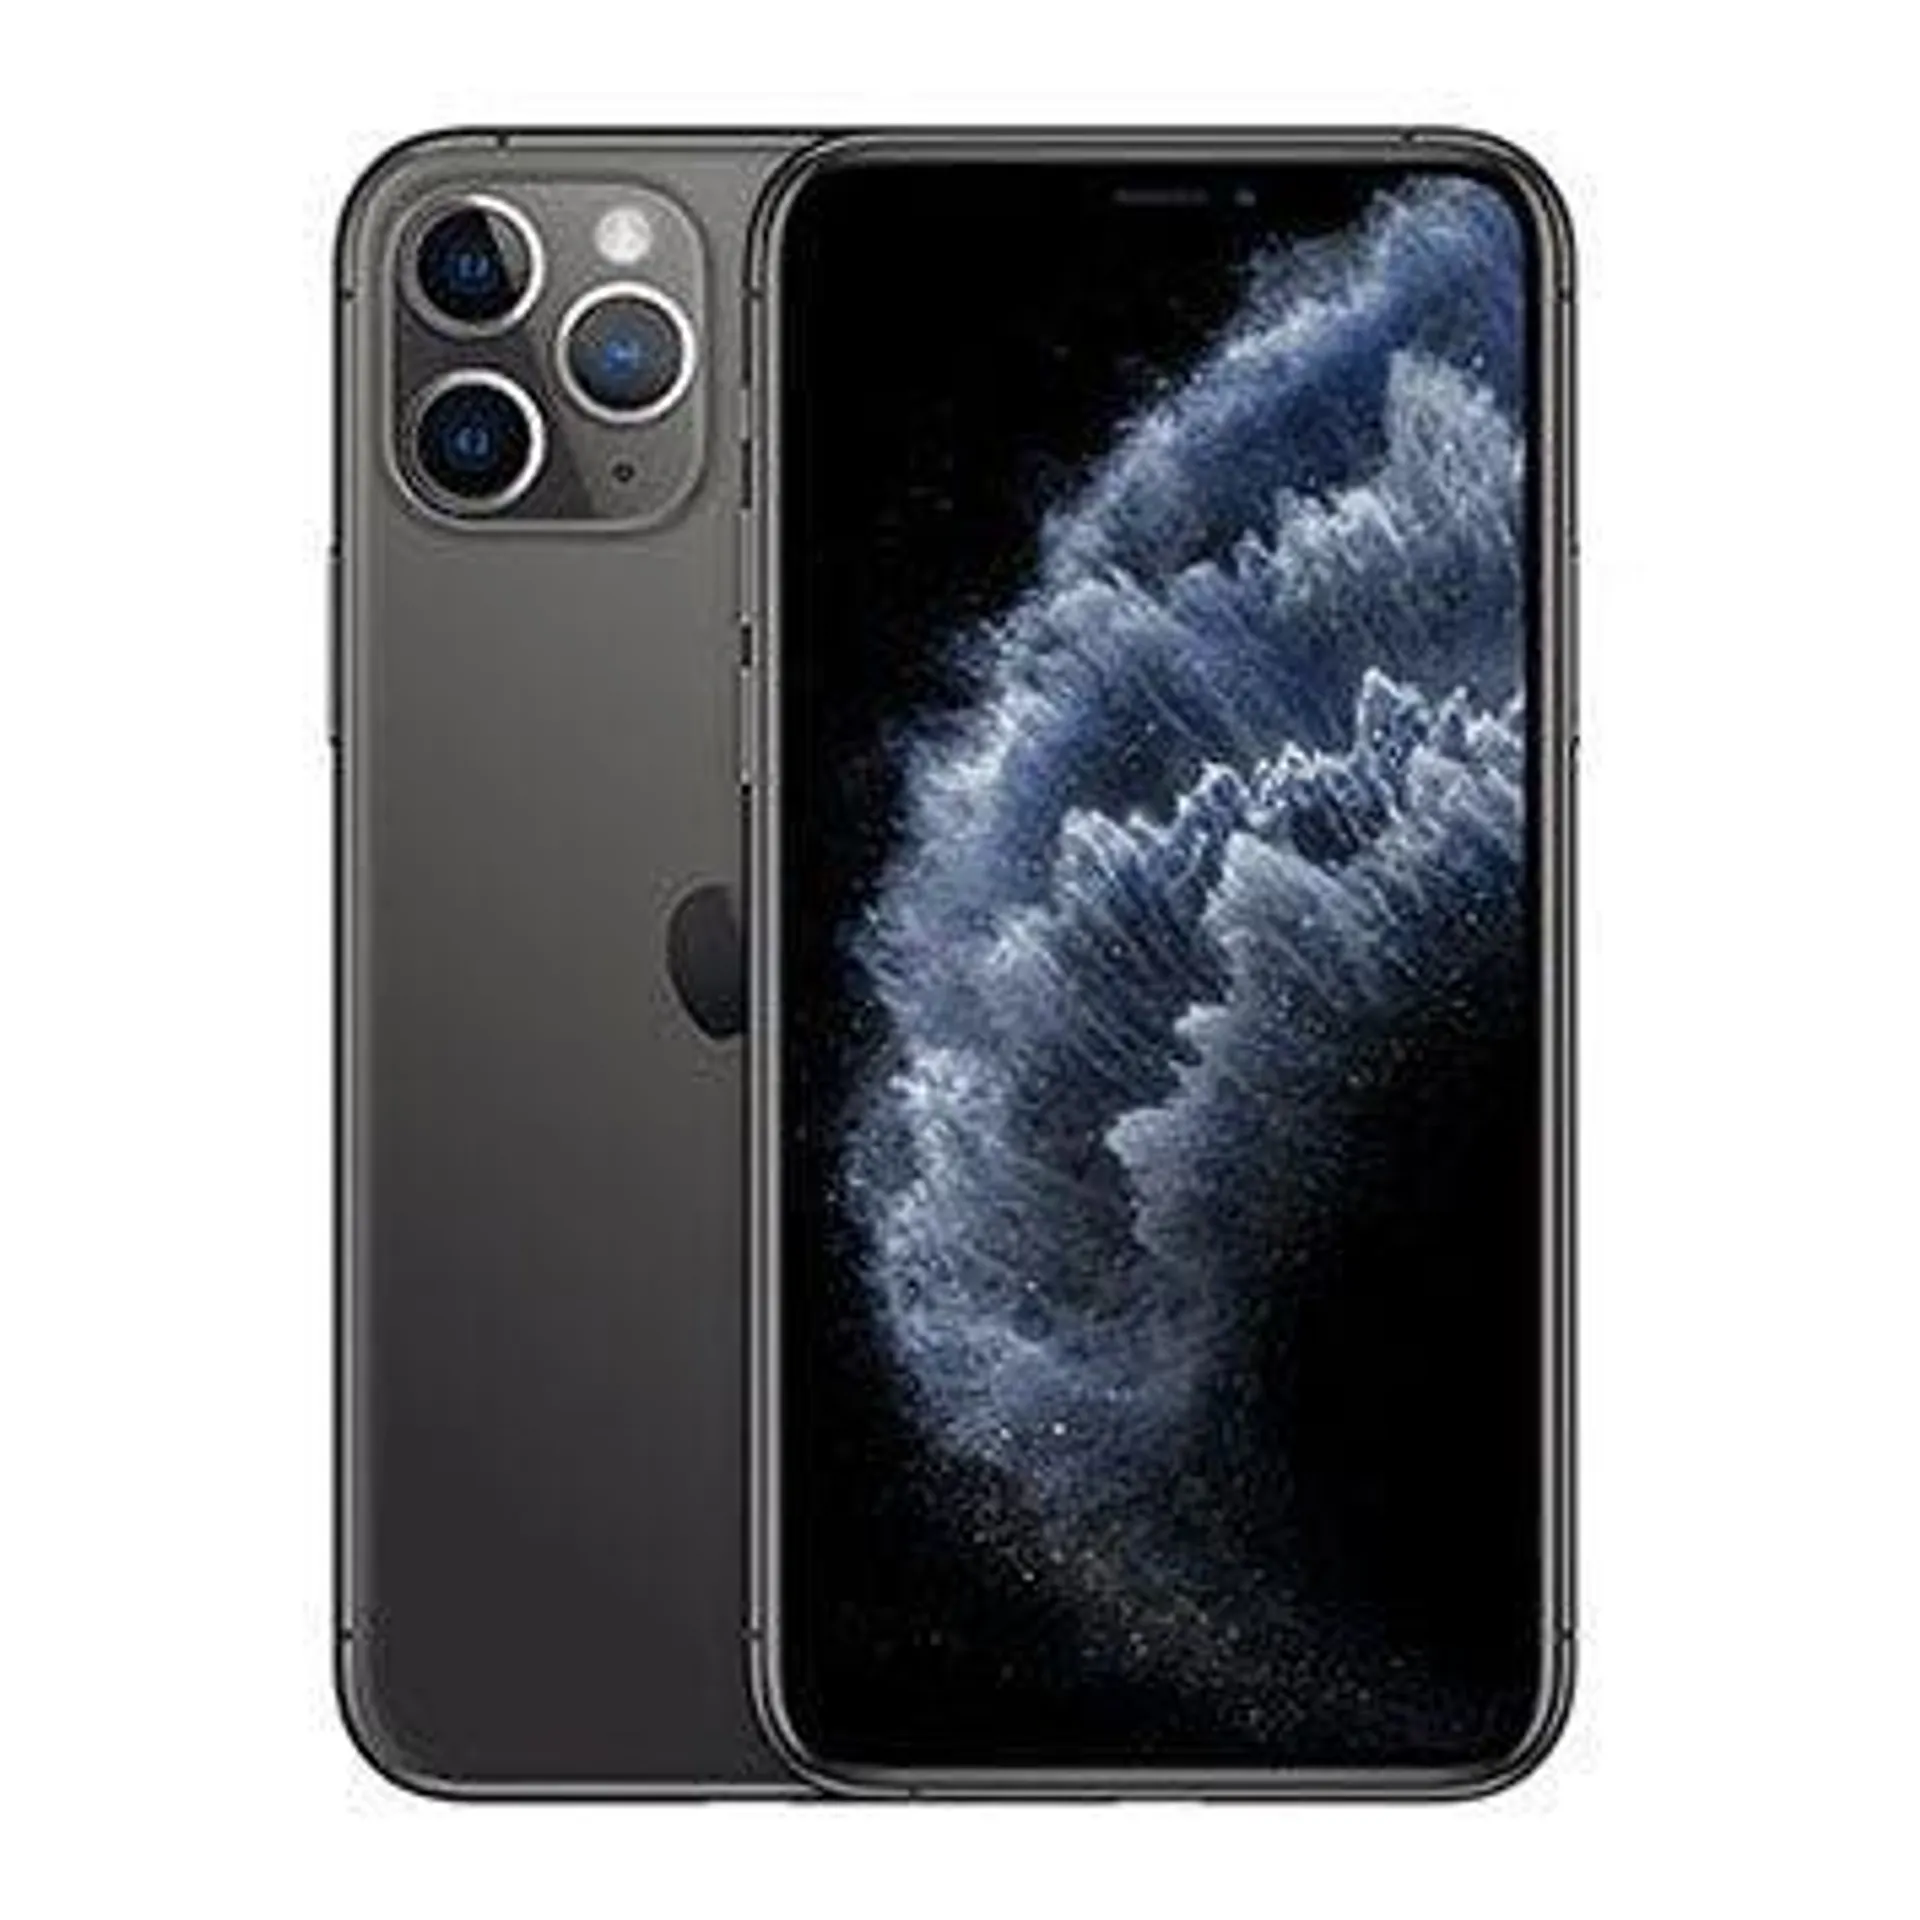 IPHONE 11 PRO 64 GO GRIS SIDERAL Neuf ou reconditionné